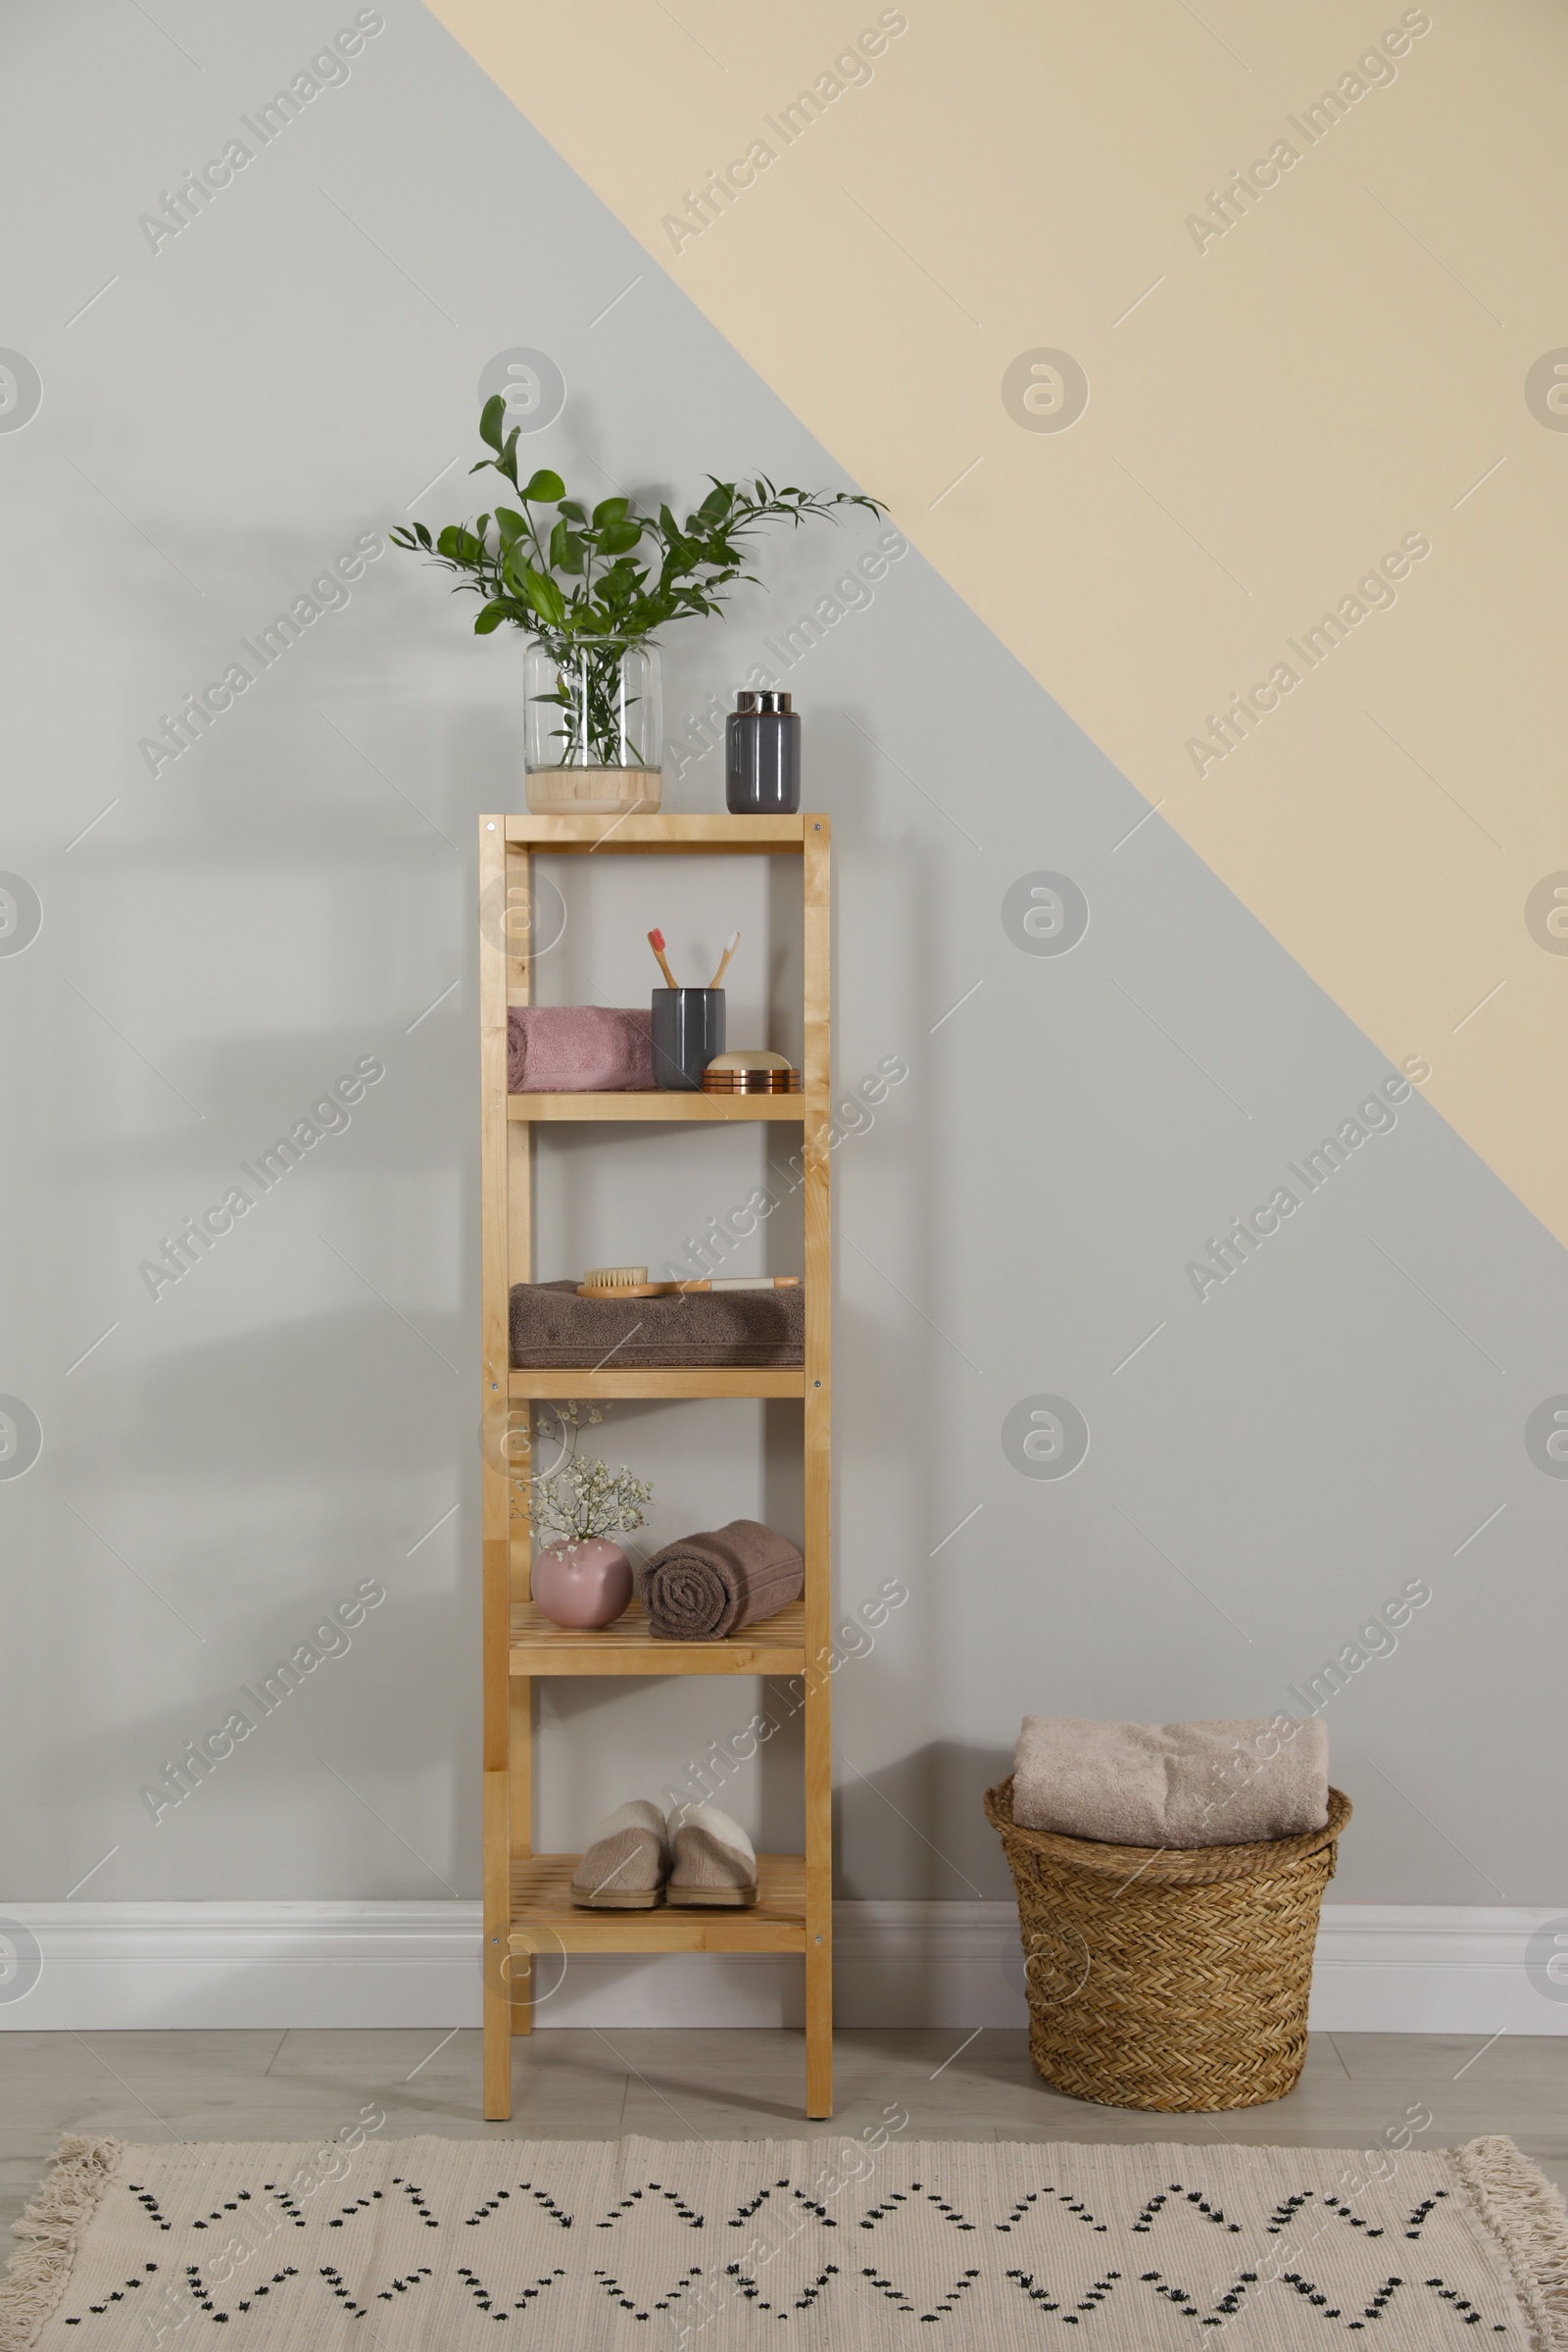 Photo of Shelving unit with toiletries near light wall indoors. Bathroom interior element